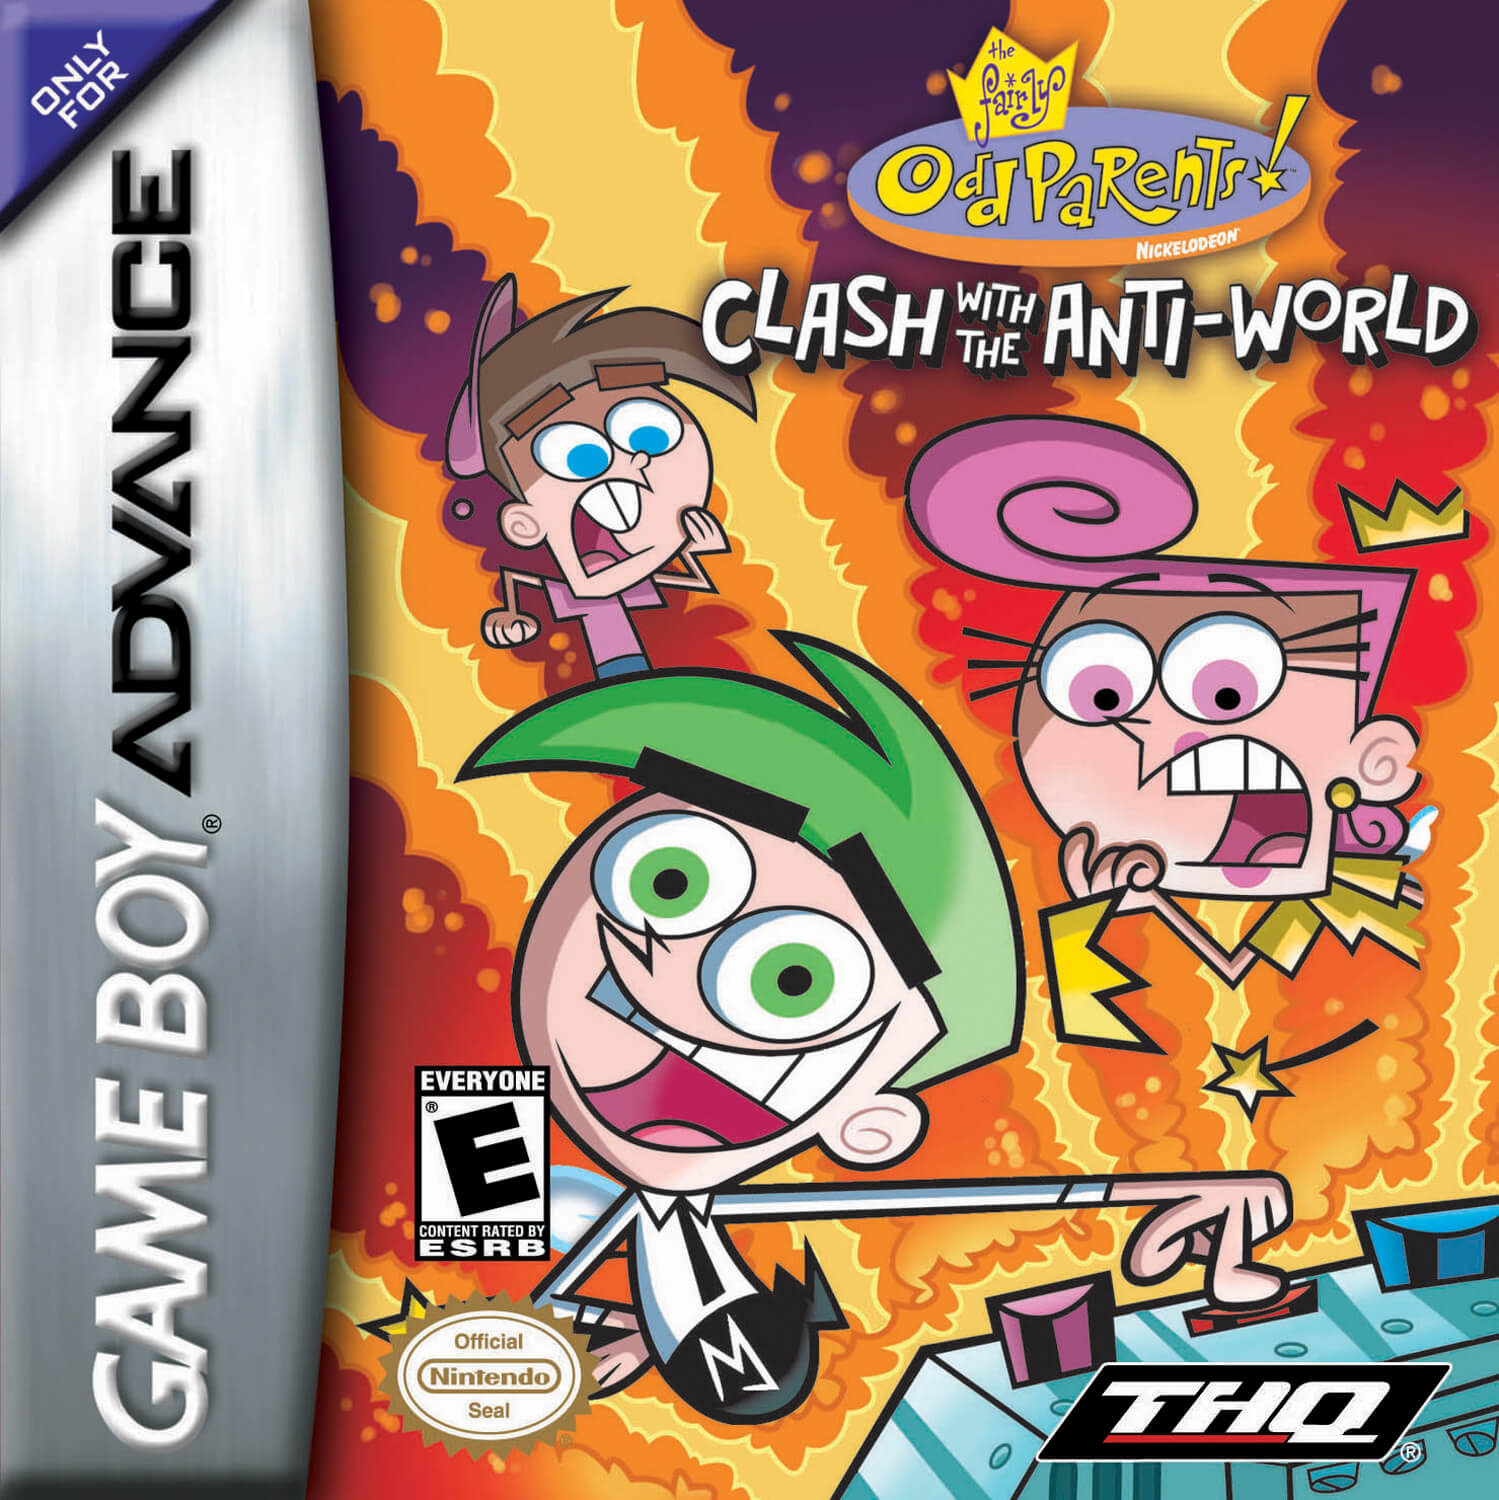 The Fairly Odd Parents!: Clash with the Anti-World